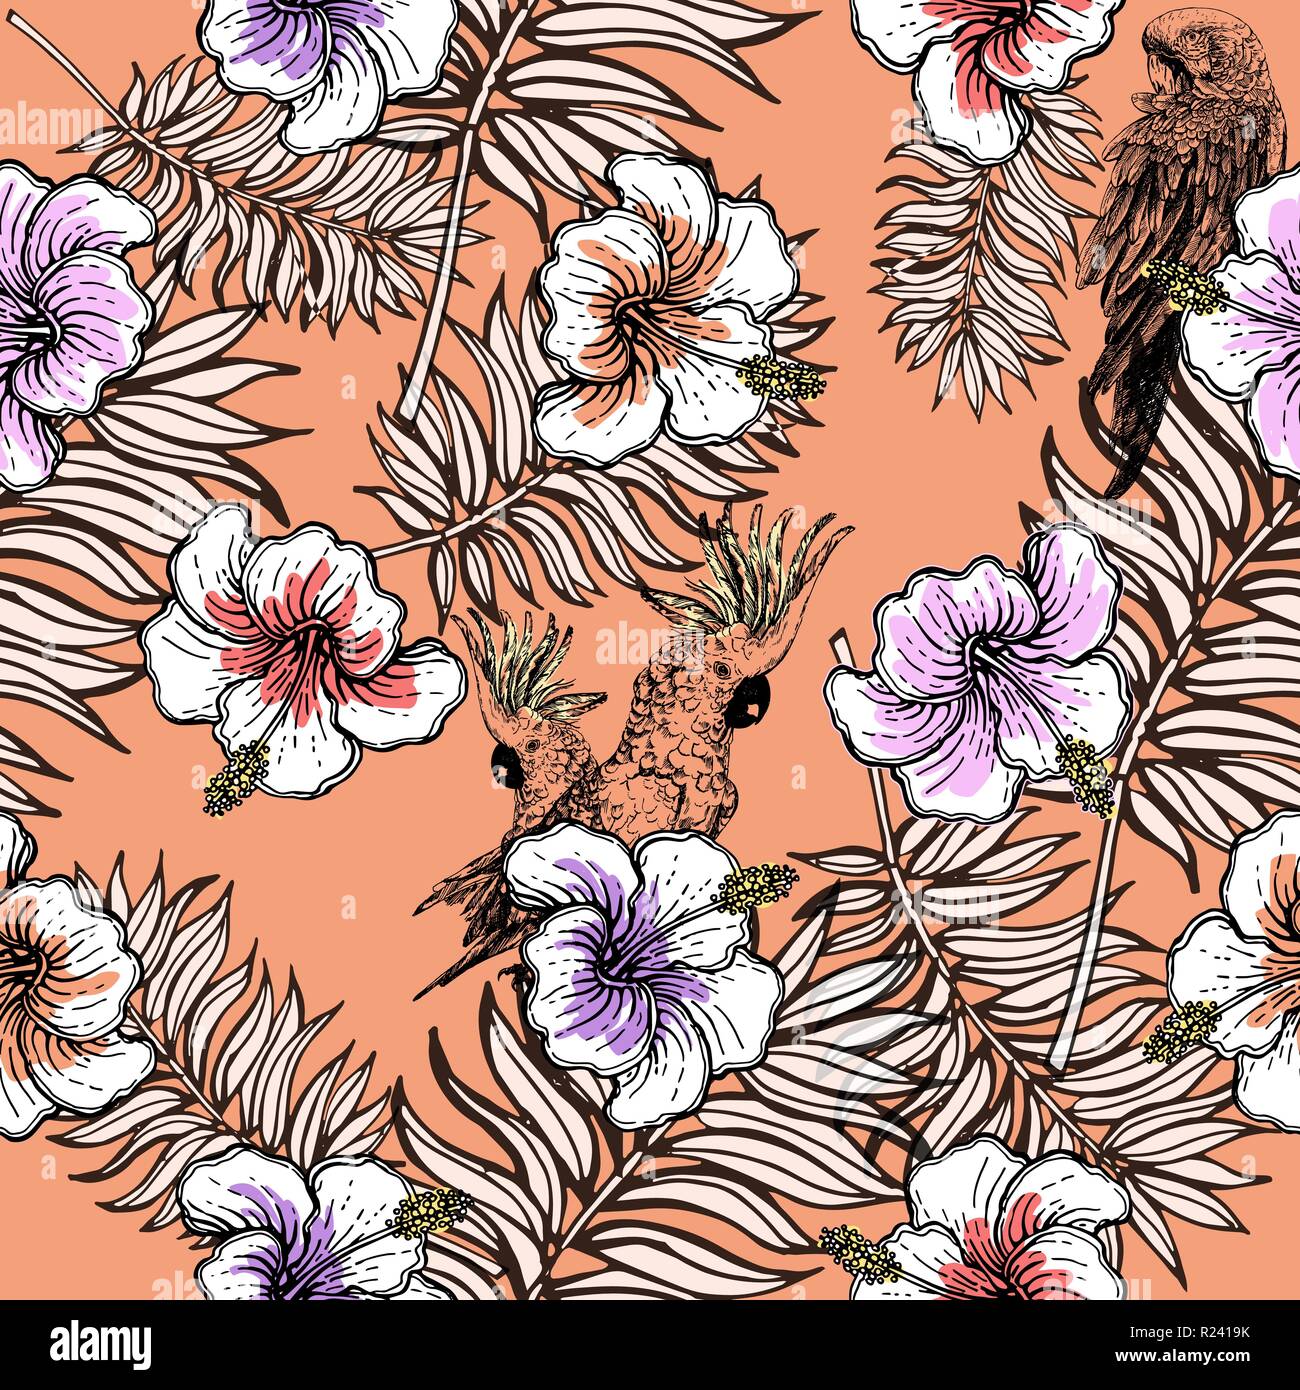 Seamless pattern of hand drawn sketch style flowers and plants. Vector illustration. Stock Vector